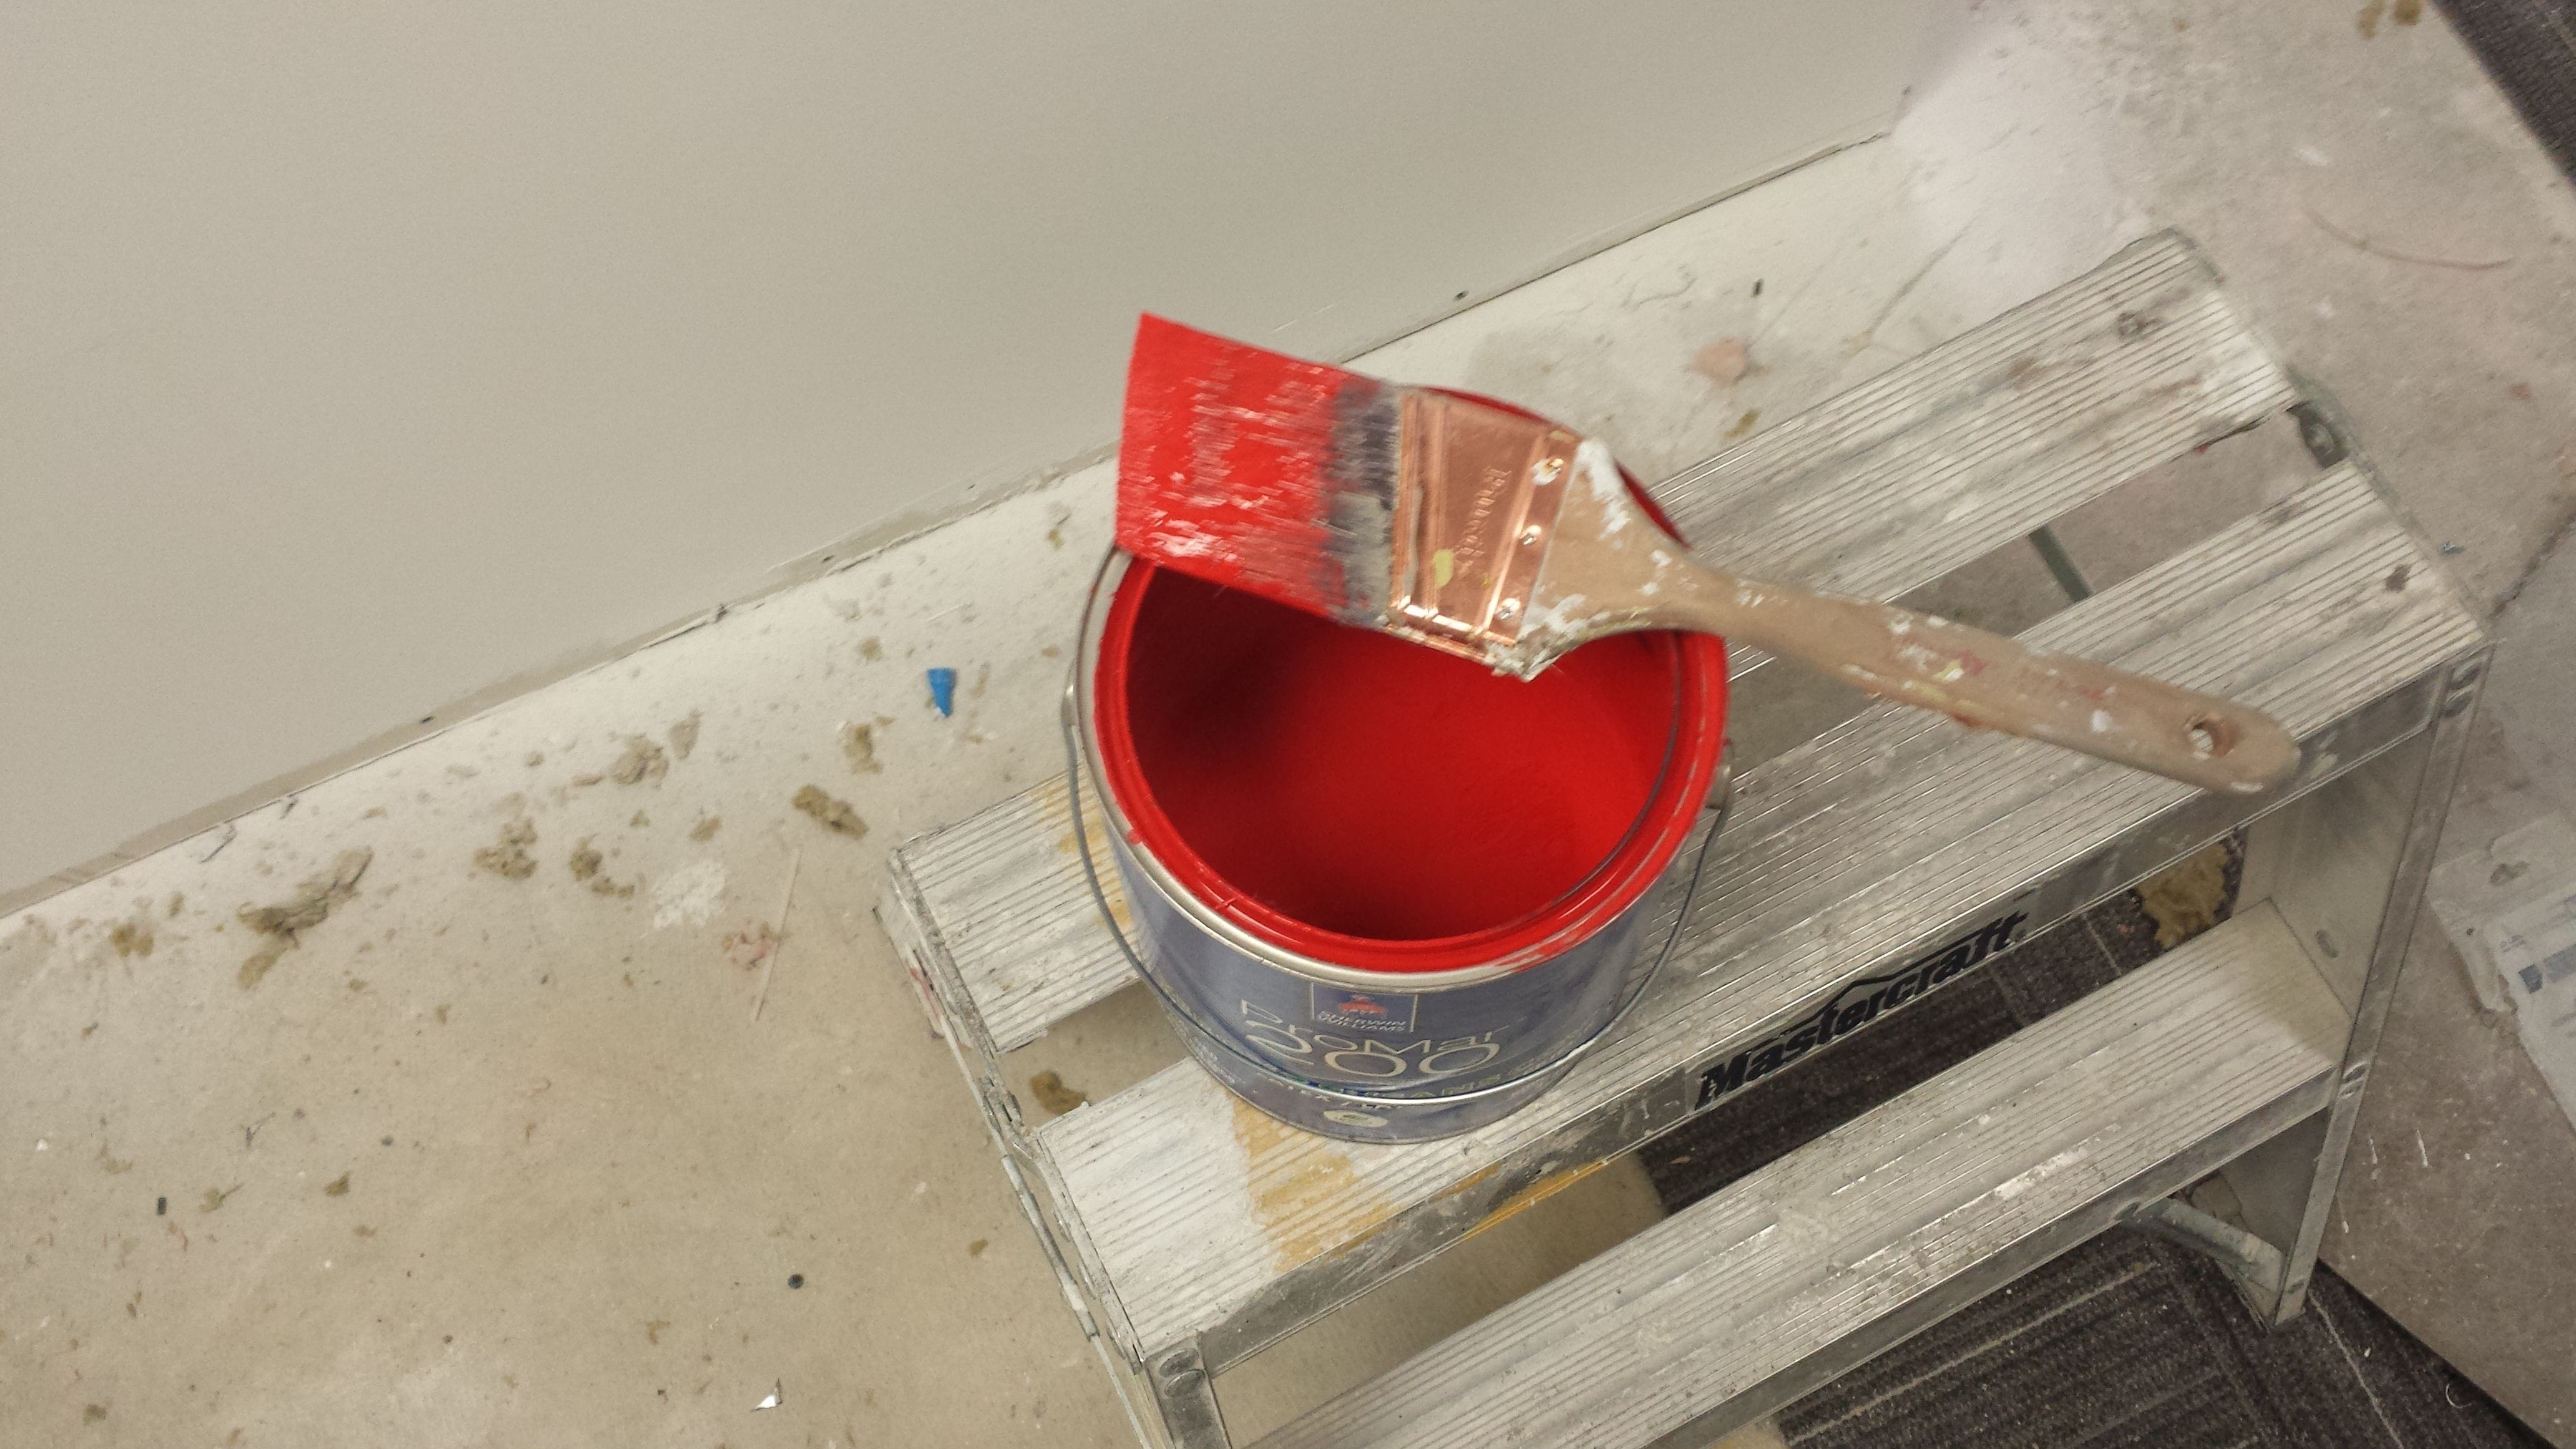 Residential & Commercial Painting Experts